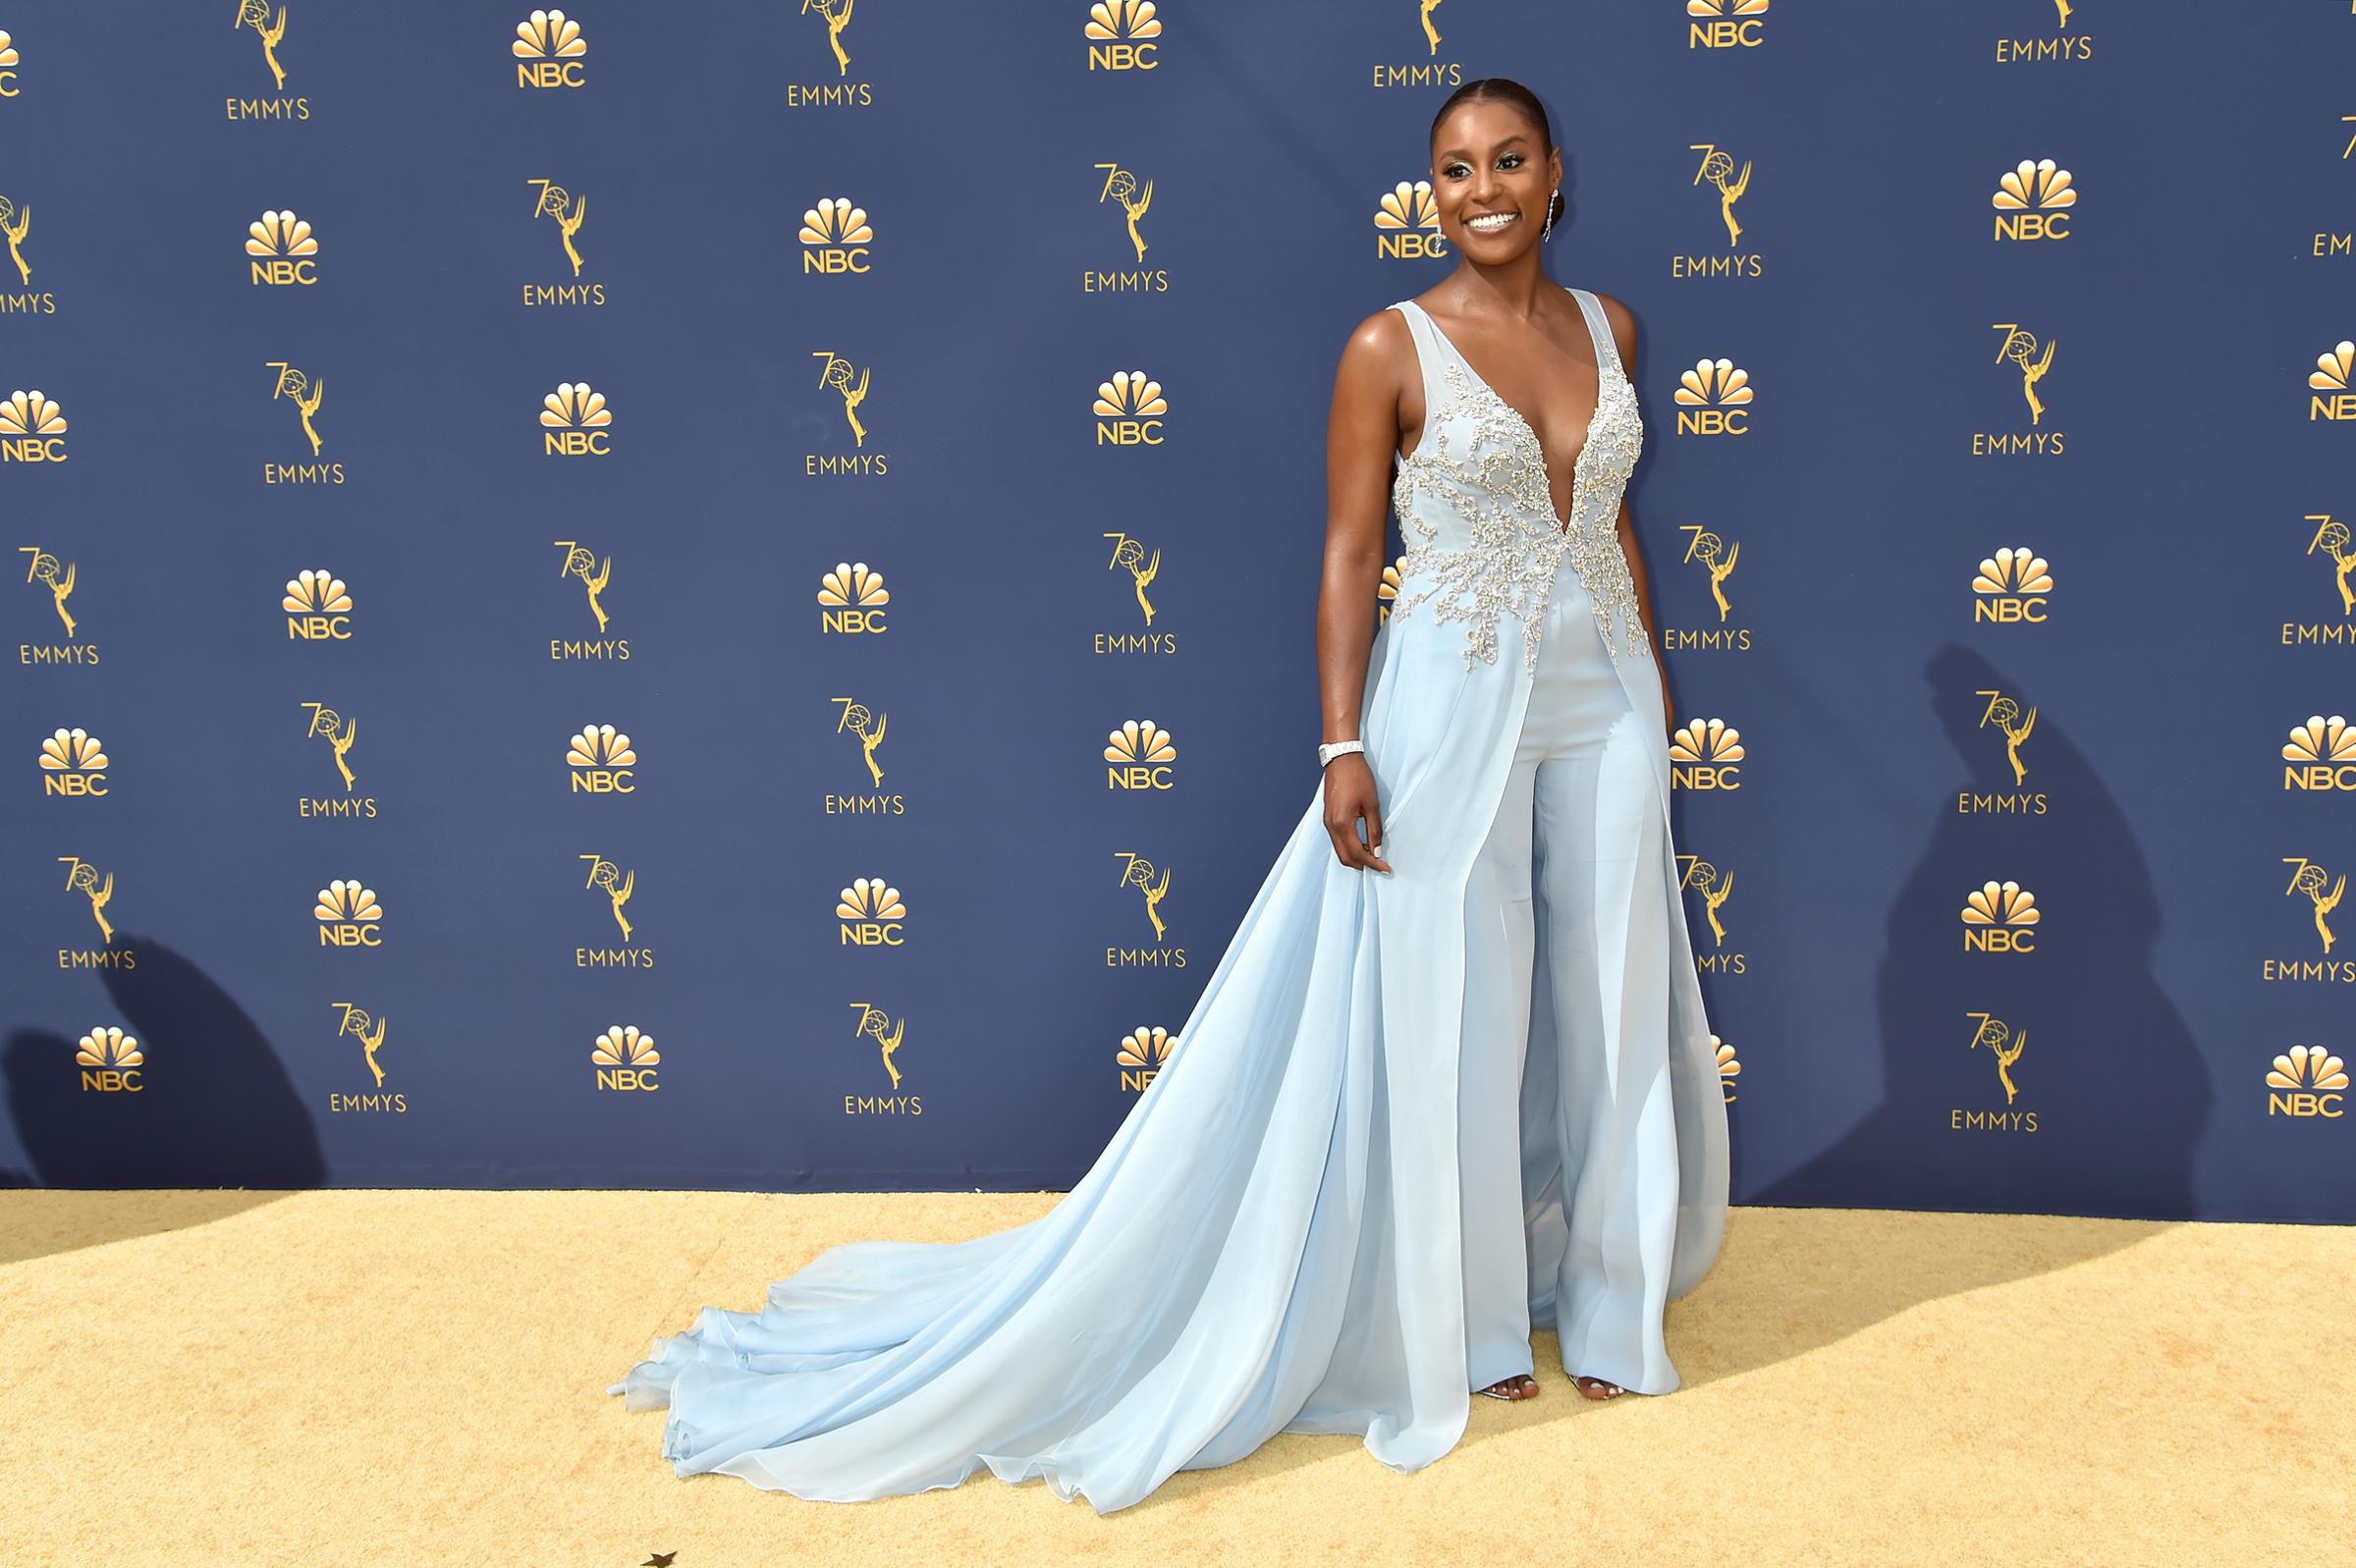 Issa Rae attends the 70th Emmy Awards on Sept. 17.